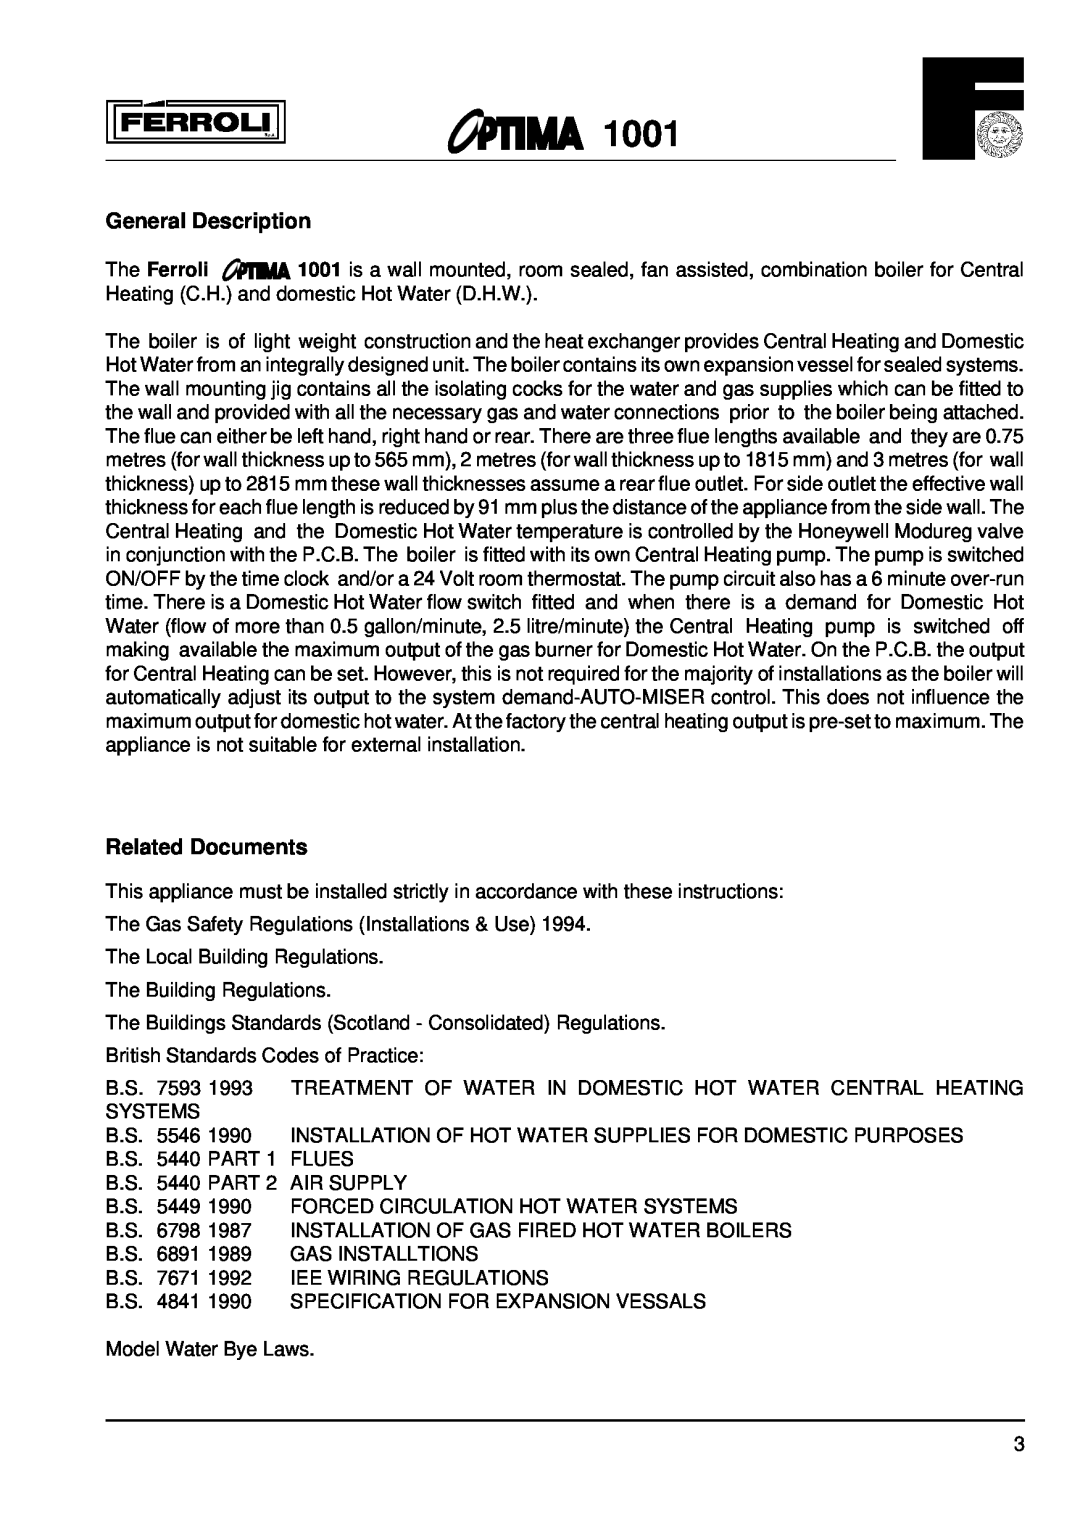 Optima Company 1001 installation instructions General Description, Related Documents 